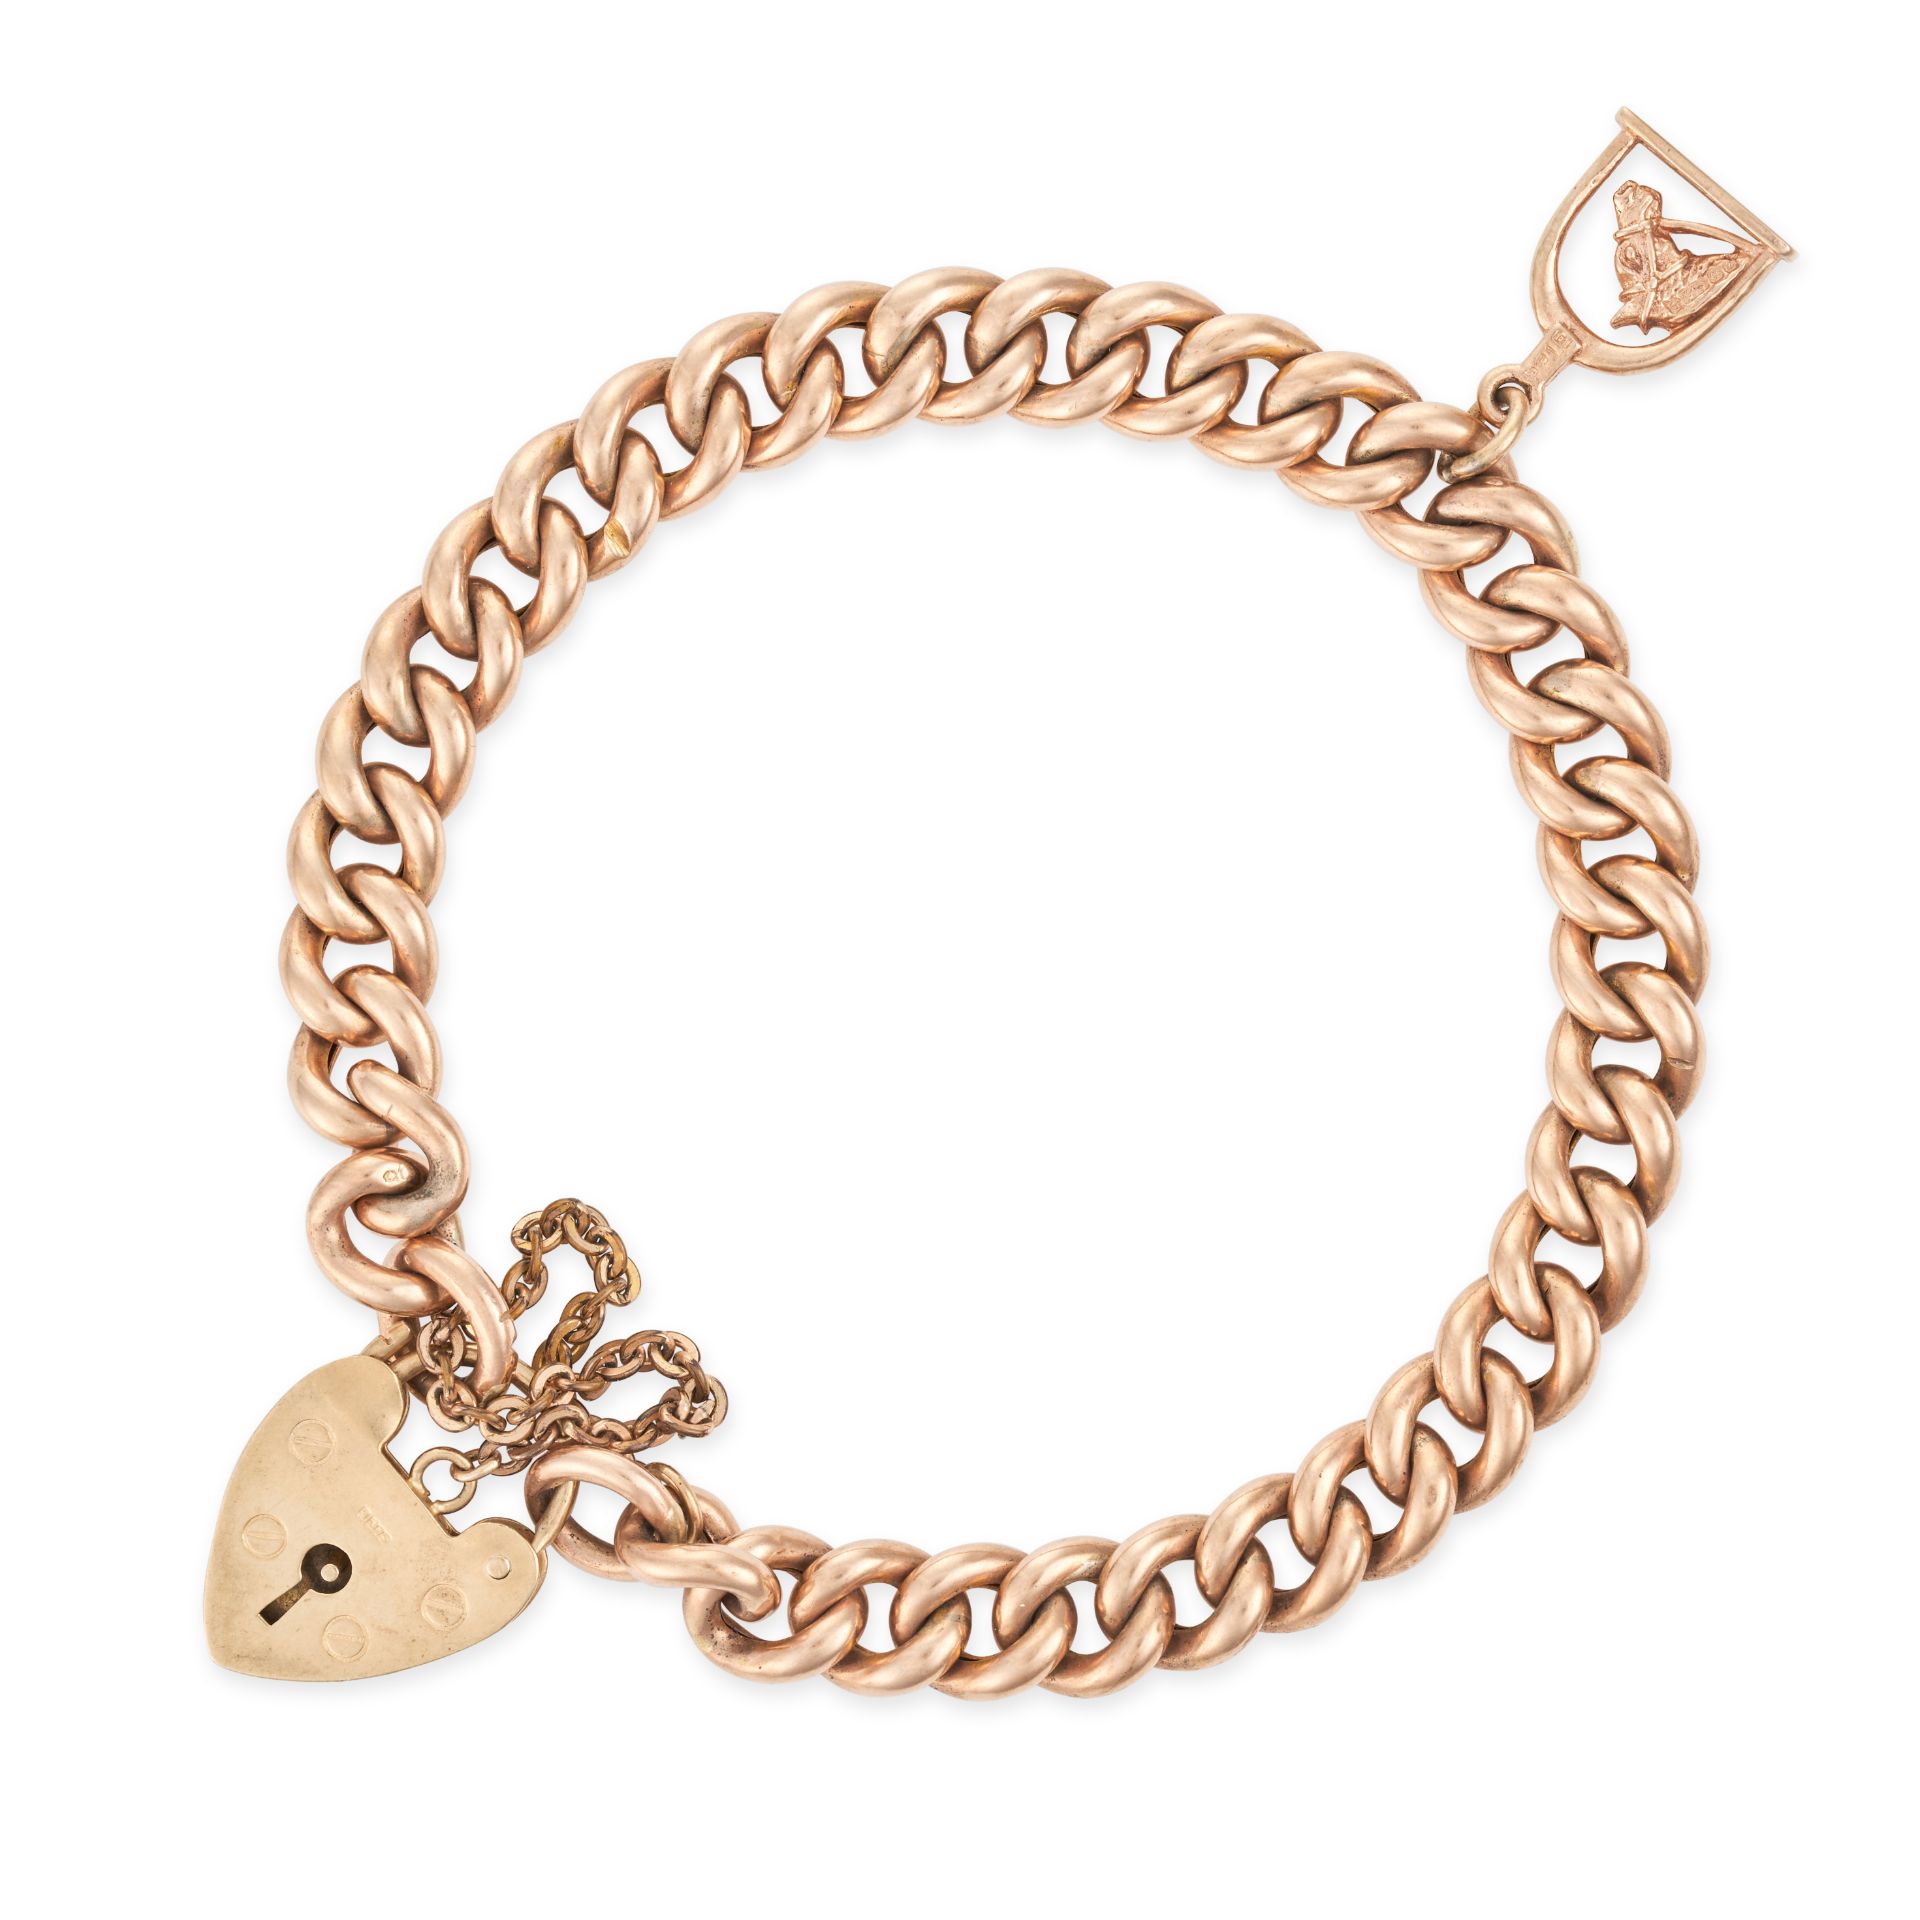 NO RESERVE - A PADLOCK BRACELET in 9ct yellow gold, comprising a curb link bracelet with a heart ...